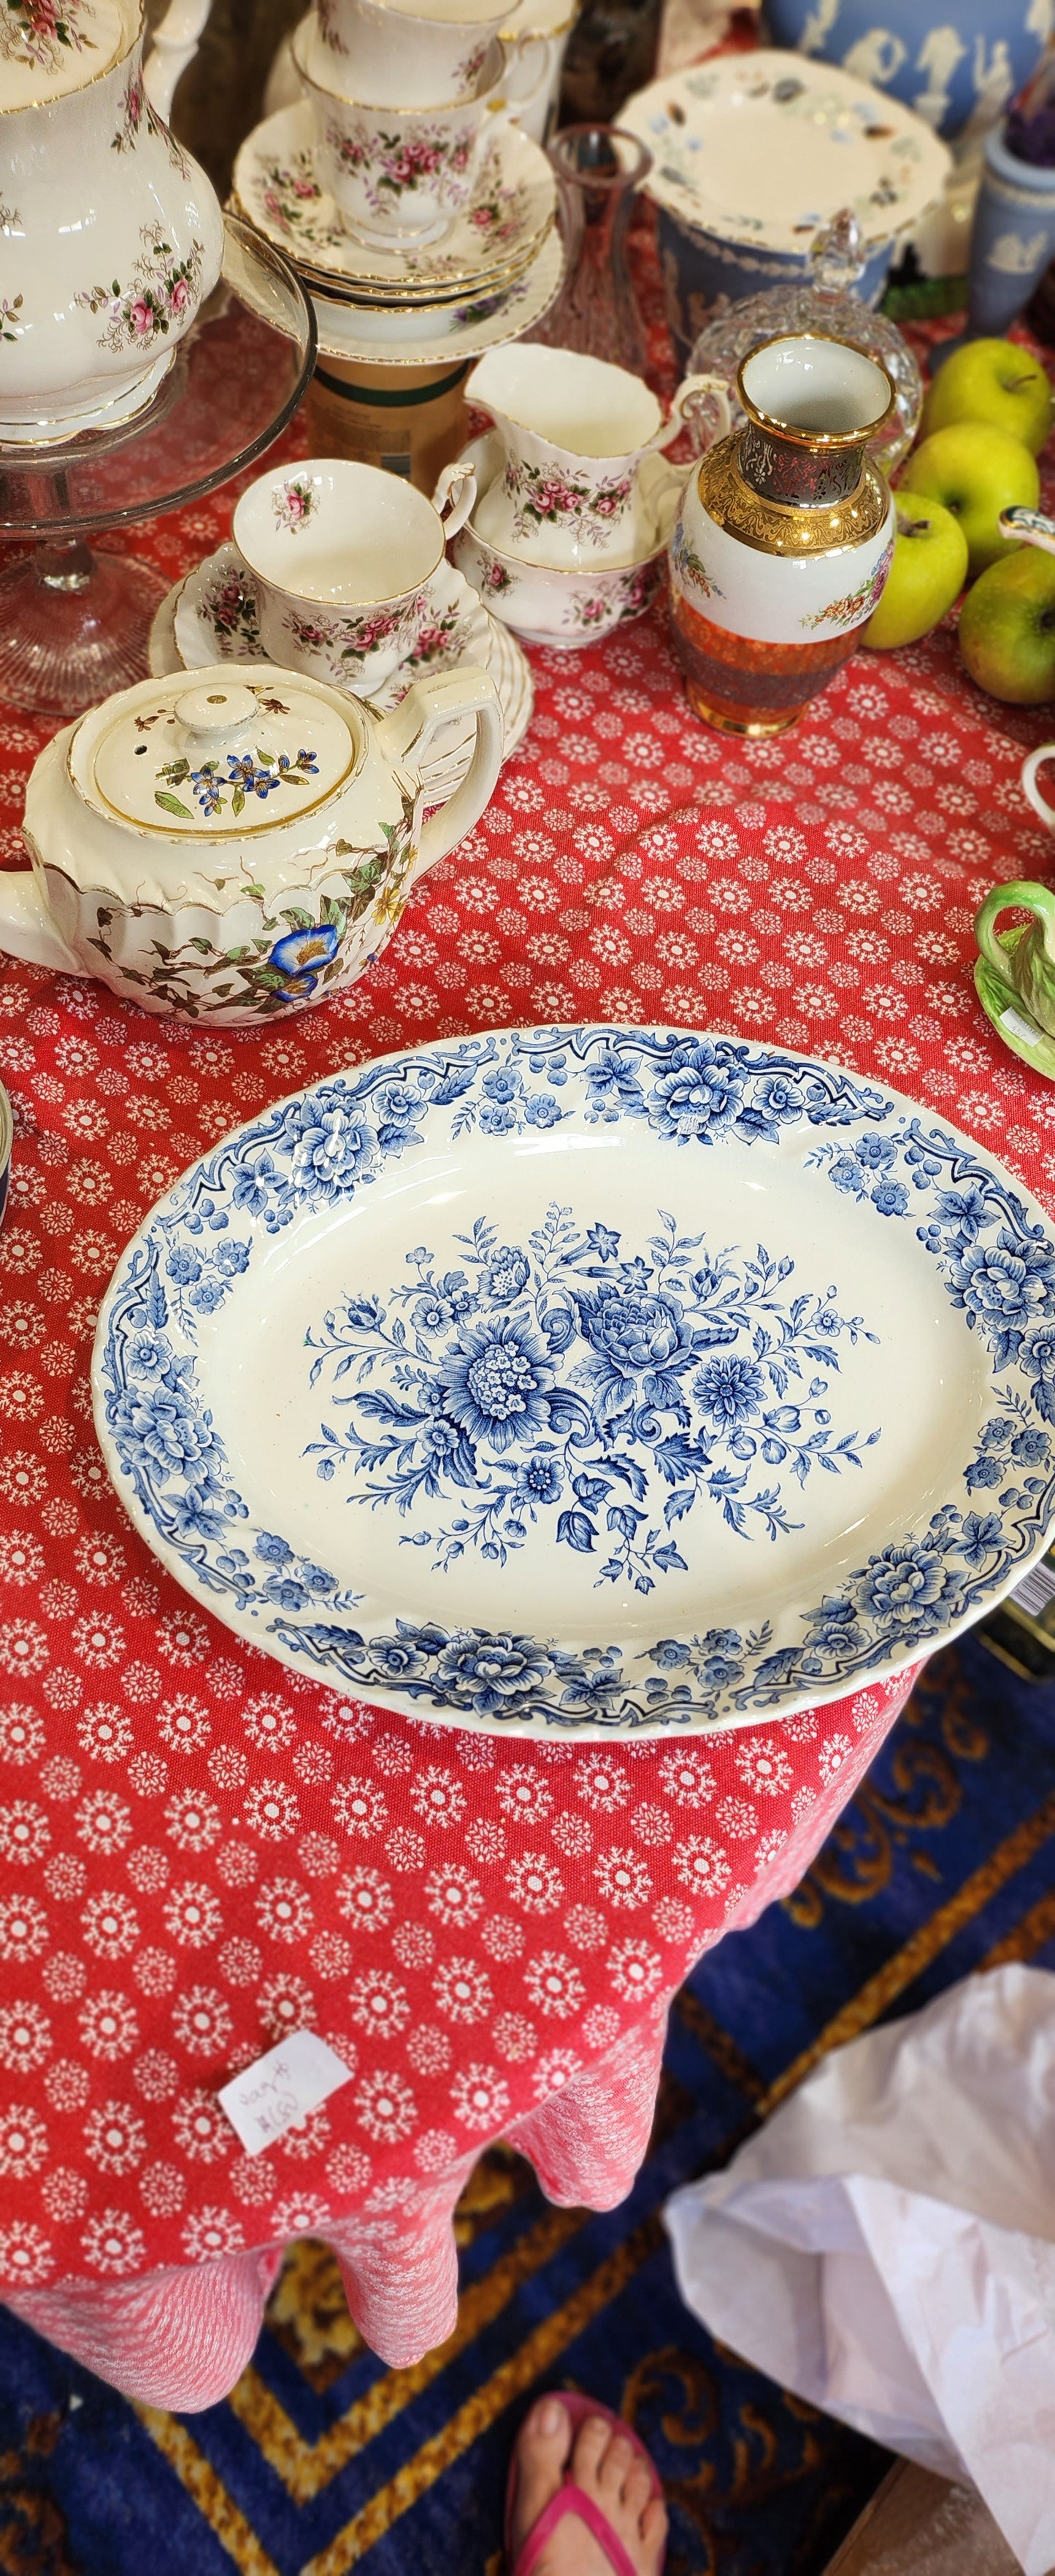 Ridgway staffordshire blue and white platter